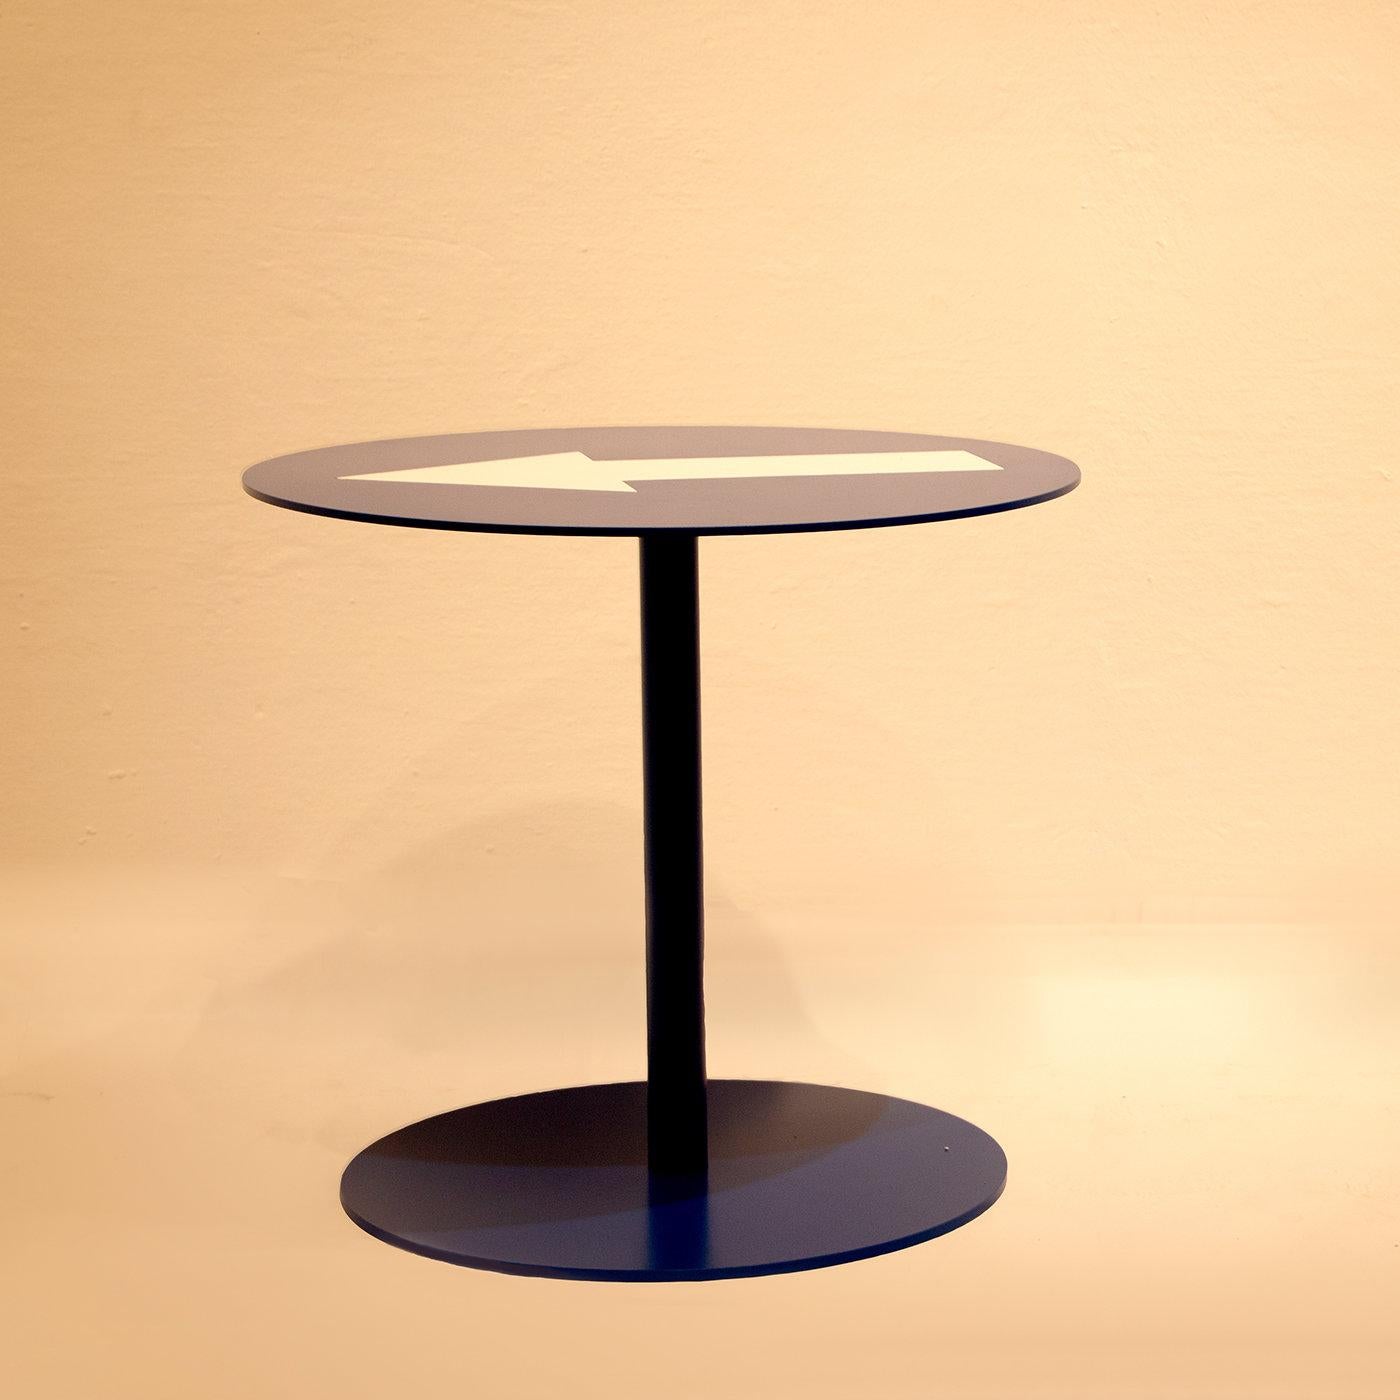 Handcrafted entirely of iron and finished in dark blue, this coffee table is part of a series that turns road signs into original and fun furniture pieces for contemporary home and office decors. The round top showcasing a white arrow is supported